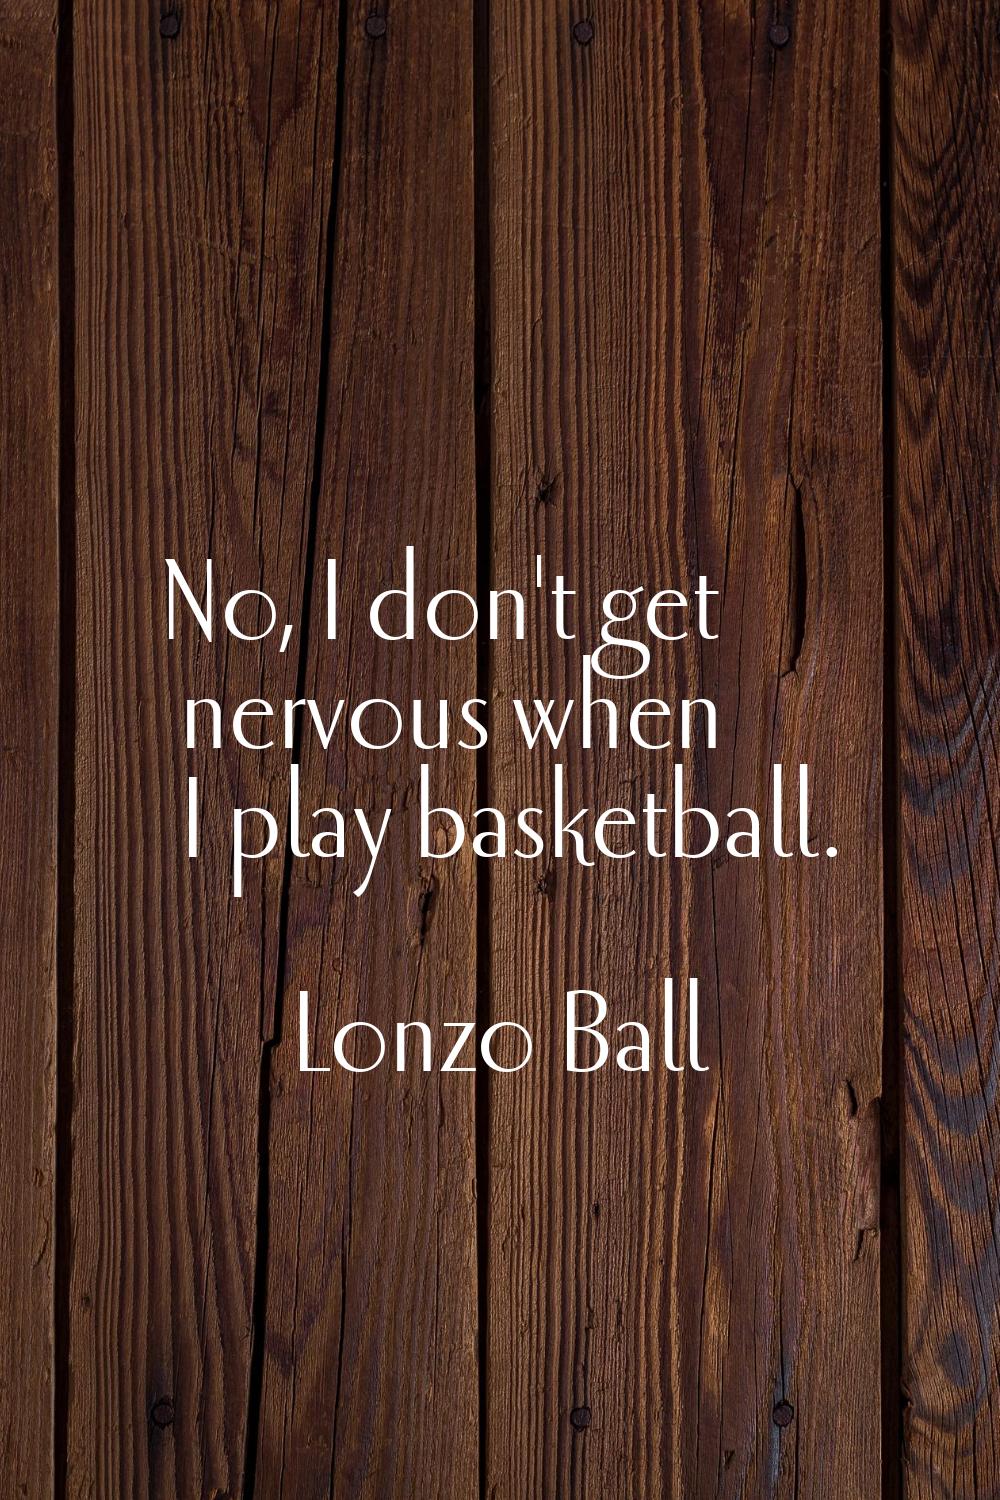 No, I don't get nervous when I play basketball.